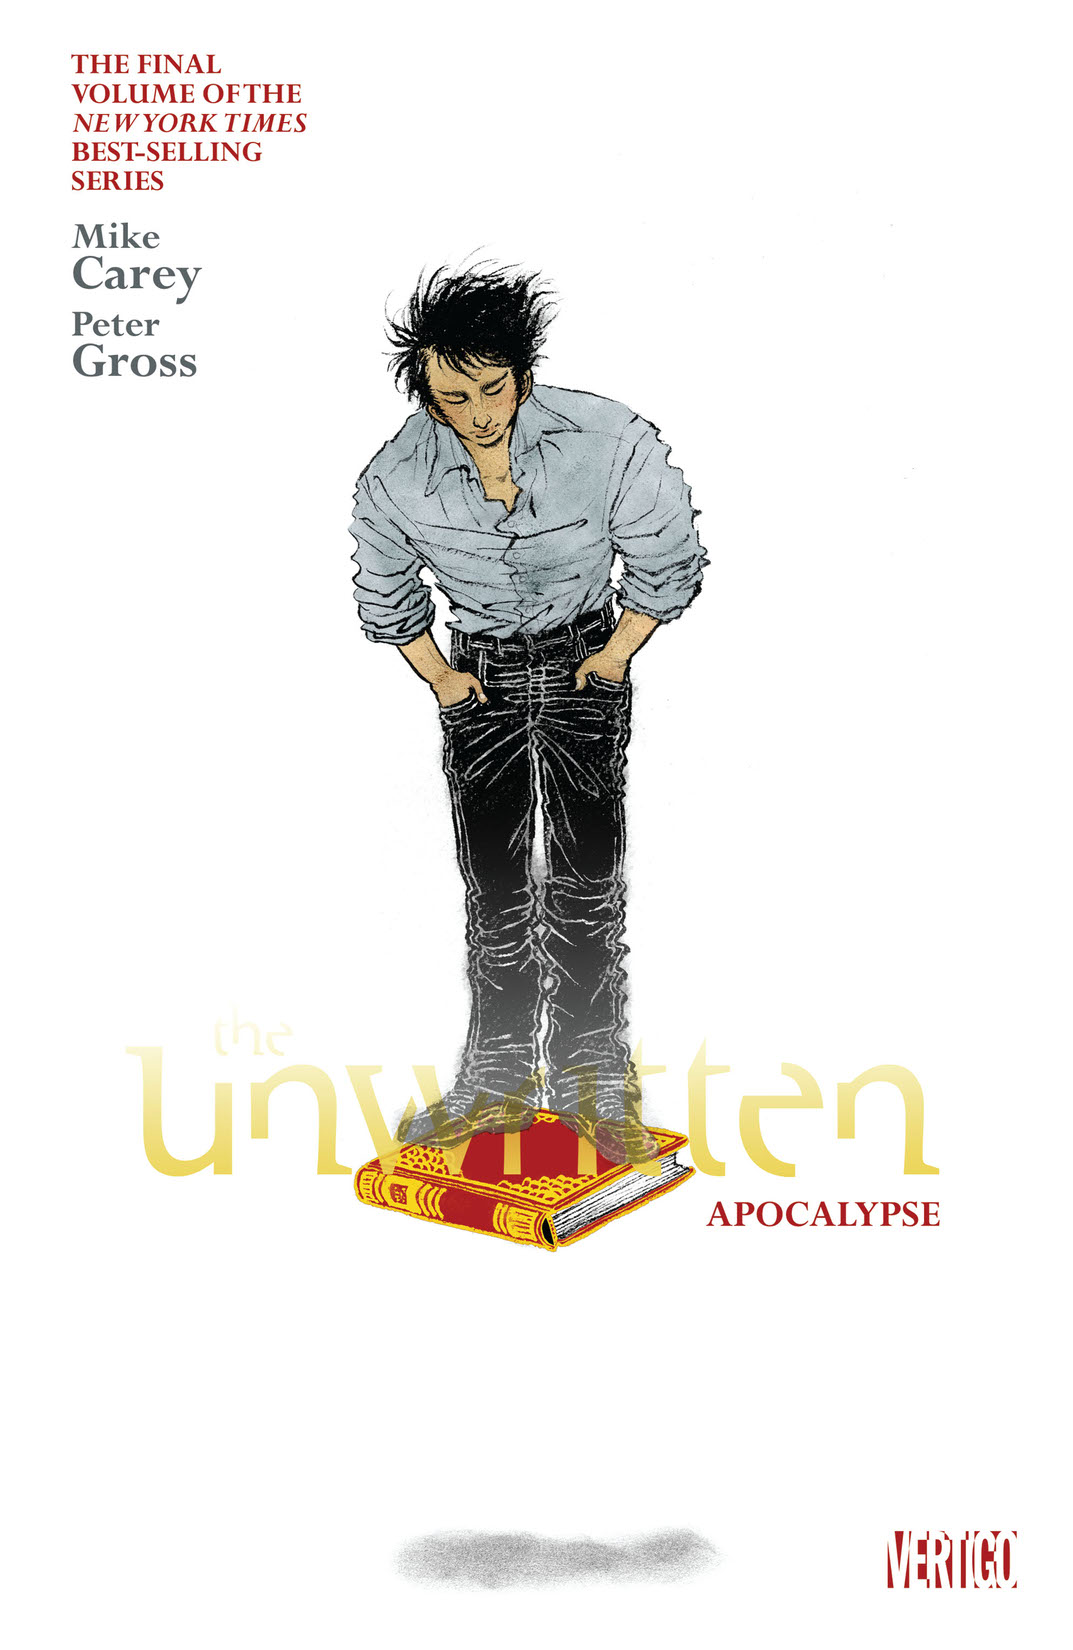 The Unwritten Vol. 11: Apocalypse preview images